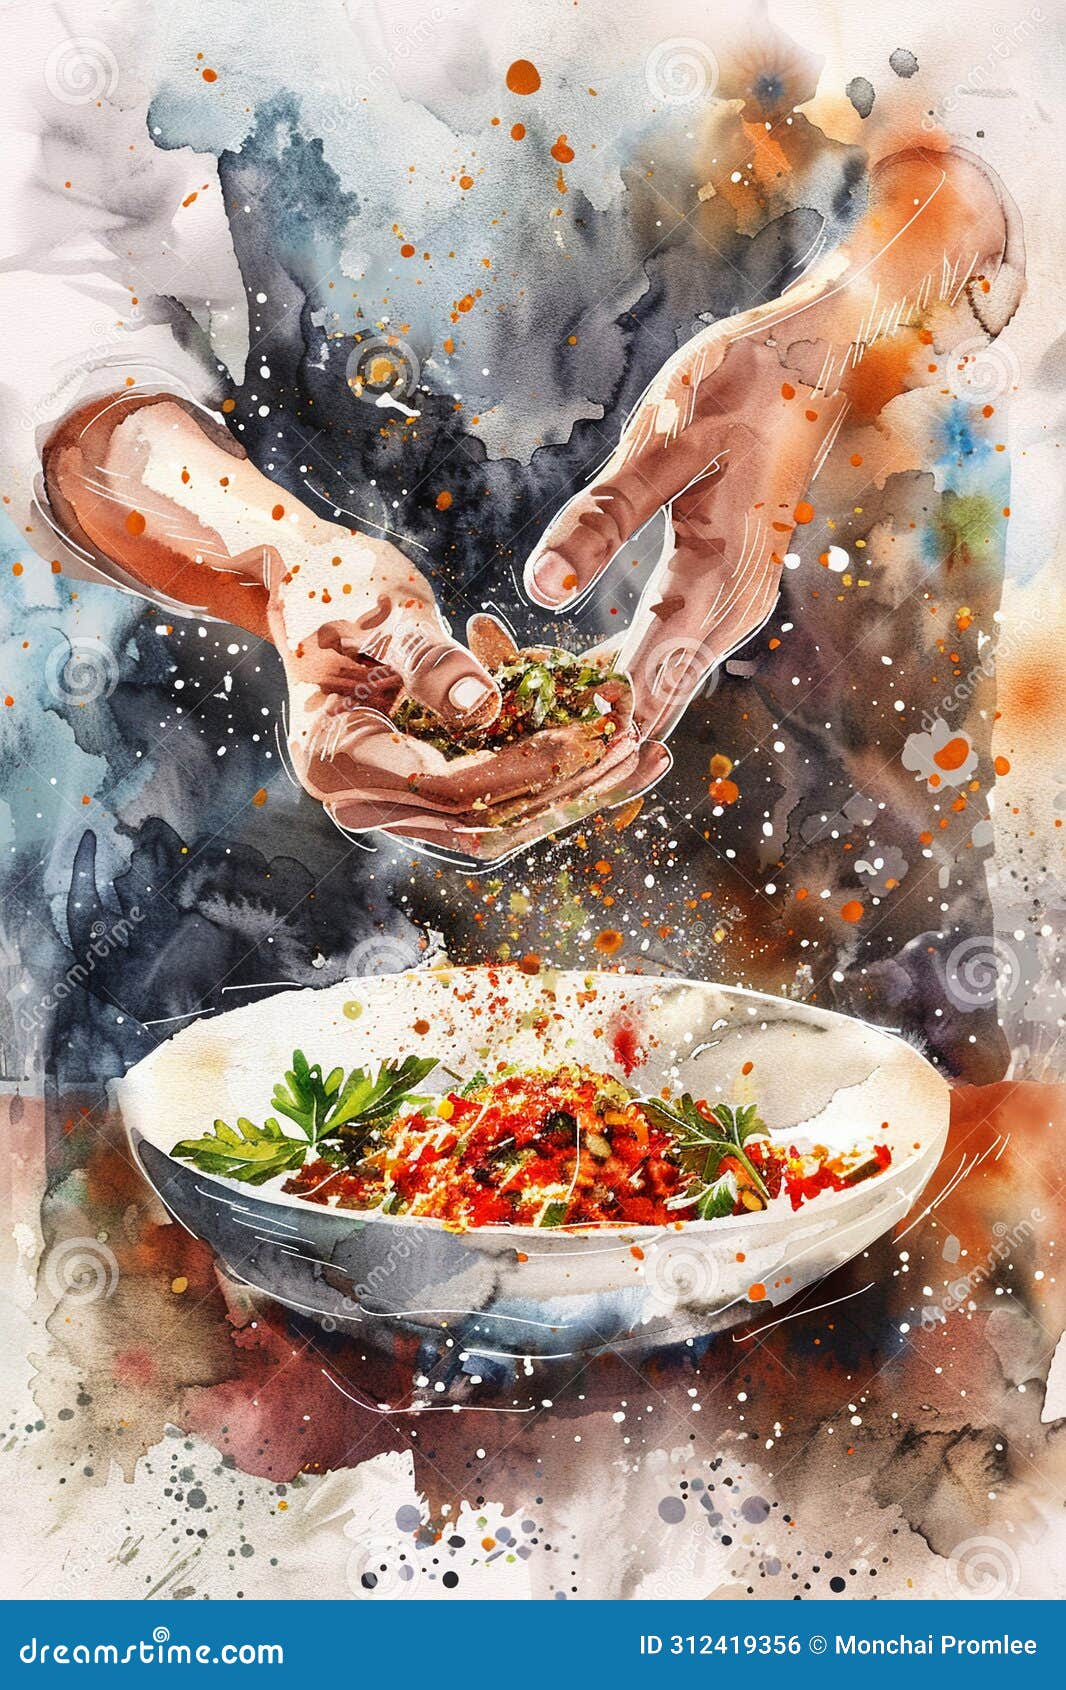 hands season a dish, sprinkling a richly colored spice mix to infuse it with exotic tastes